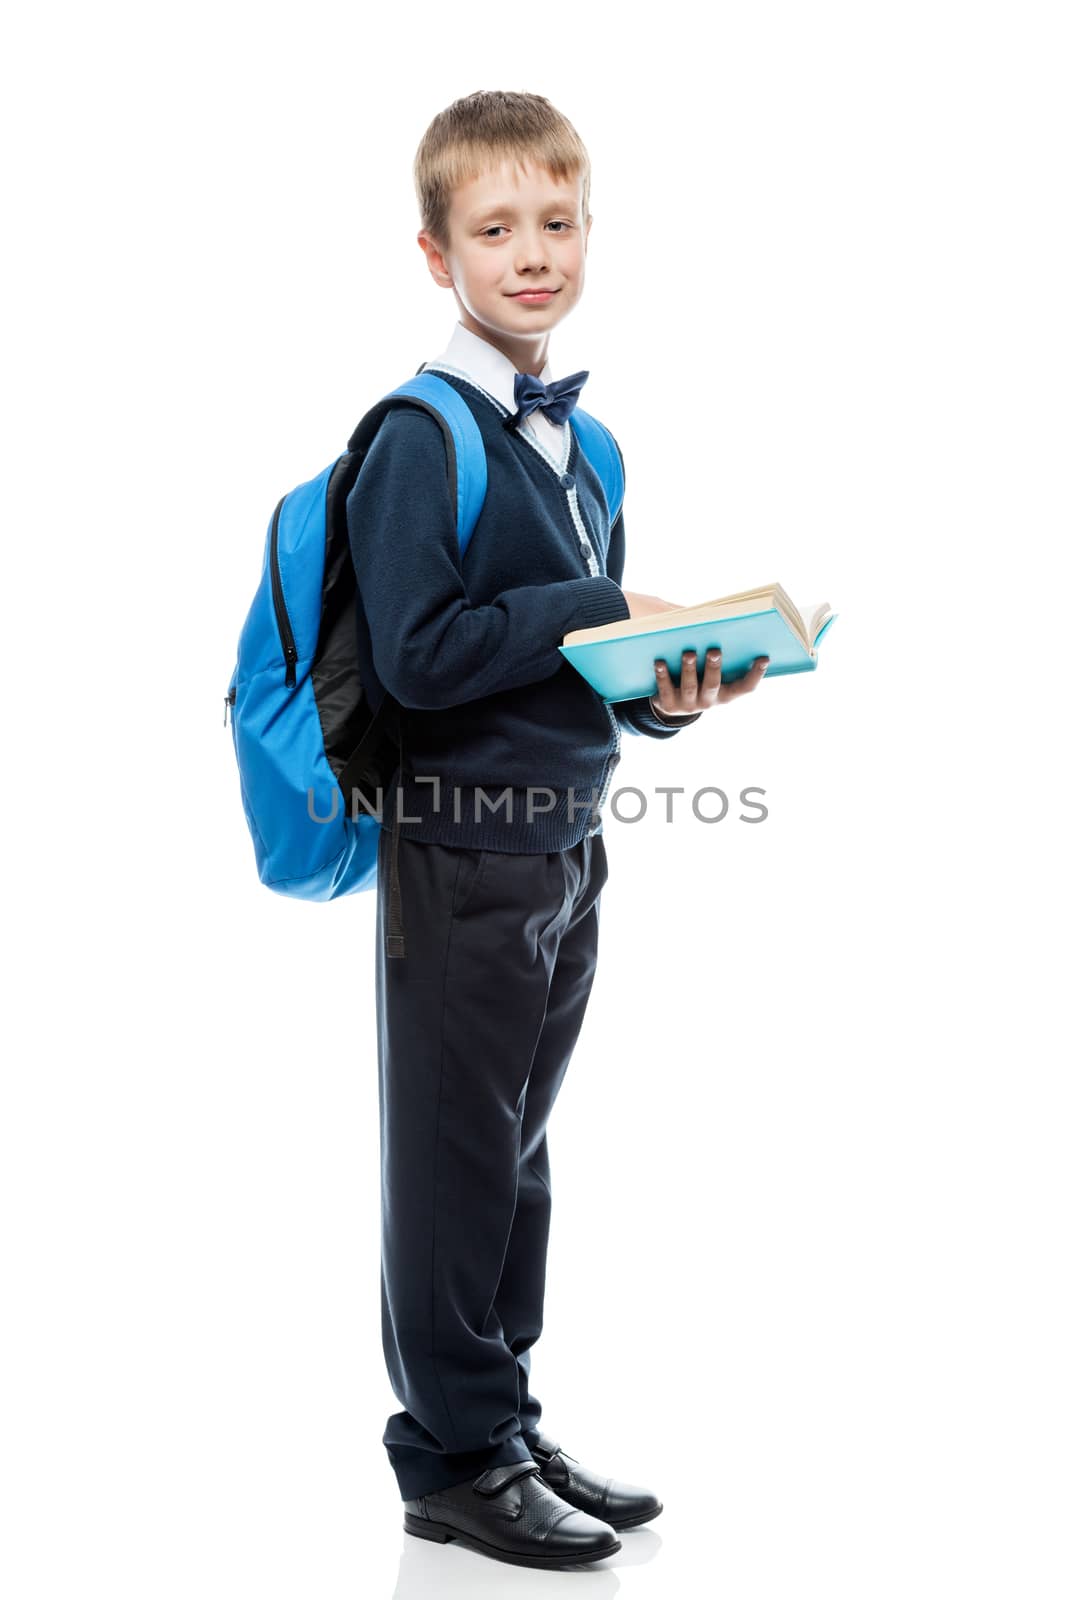 schoolboy with a book and a backpack in the studio on a white ba by kosmsos111